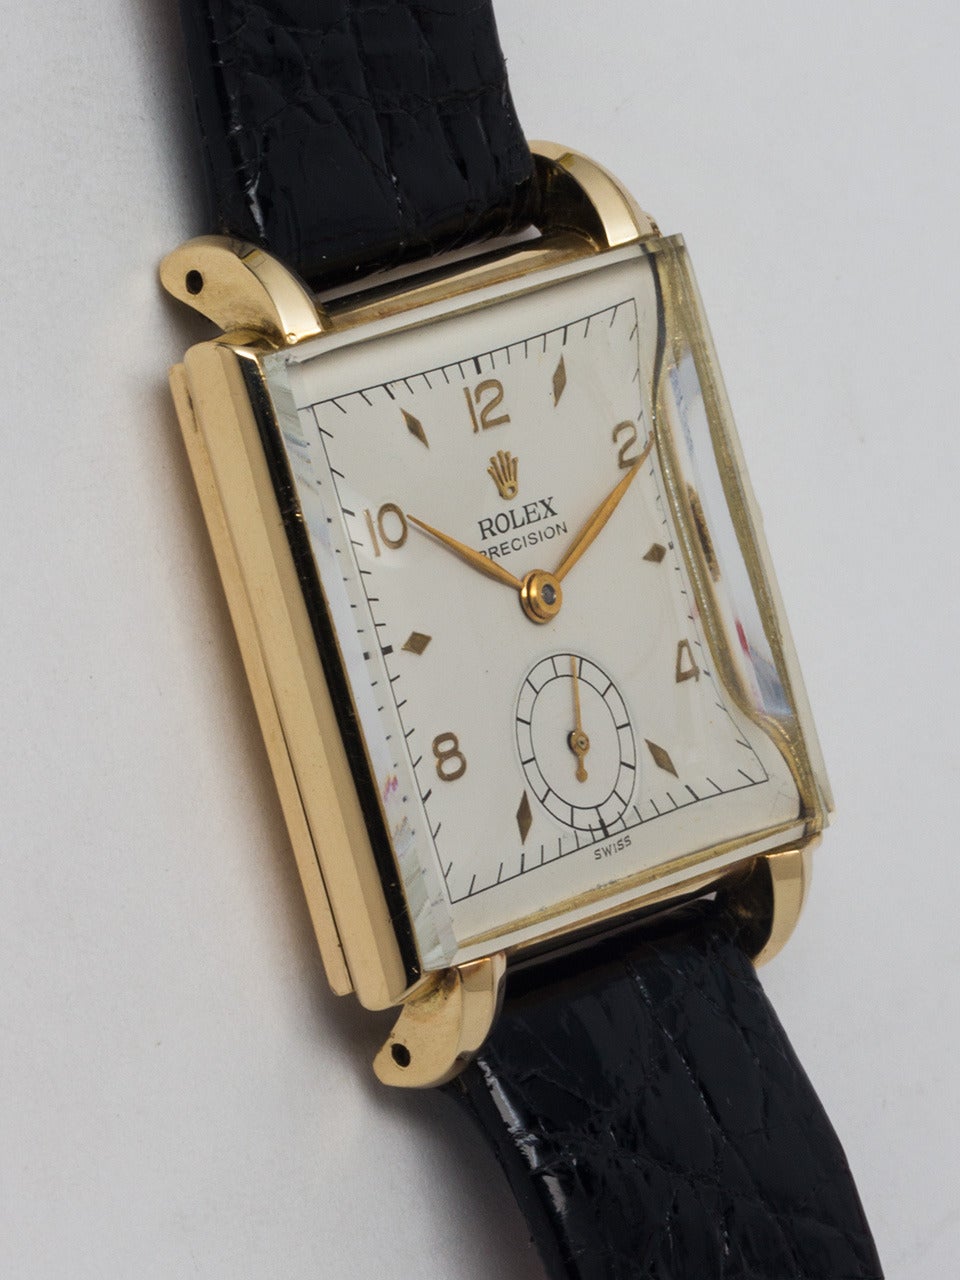 Rolex 14K yellow gold square wristwatch, circa 1950s. 28 X 36mm heavy case with claw lugs and mushroom-style crown. Very pleasing restored dial with raised gold indexes and gold leaf hands. Powered by a calibre 10 1/2 H 17-jewel manual-wind movement